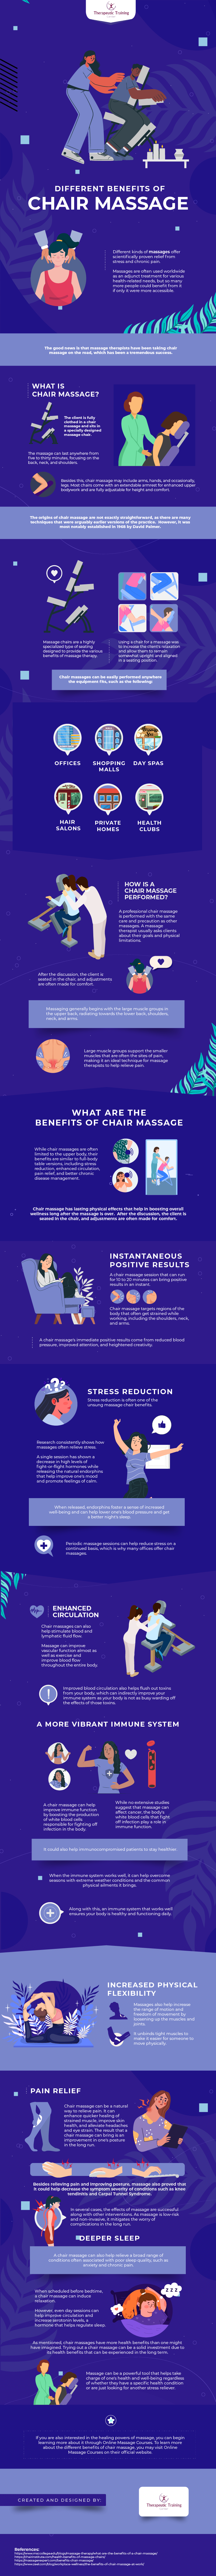 chair_massage_infographic_image